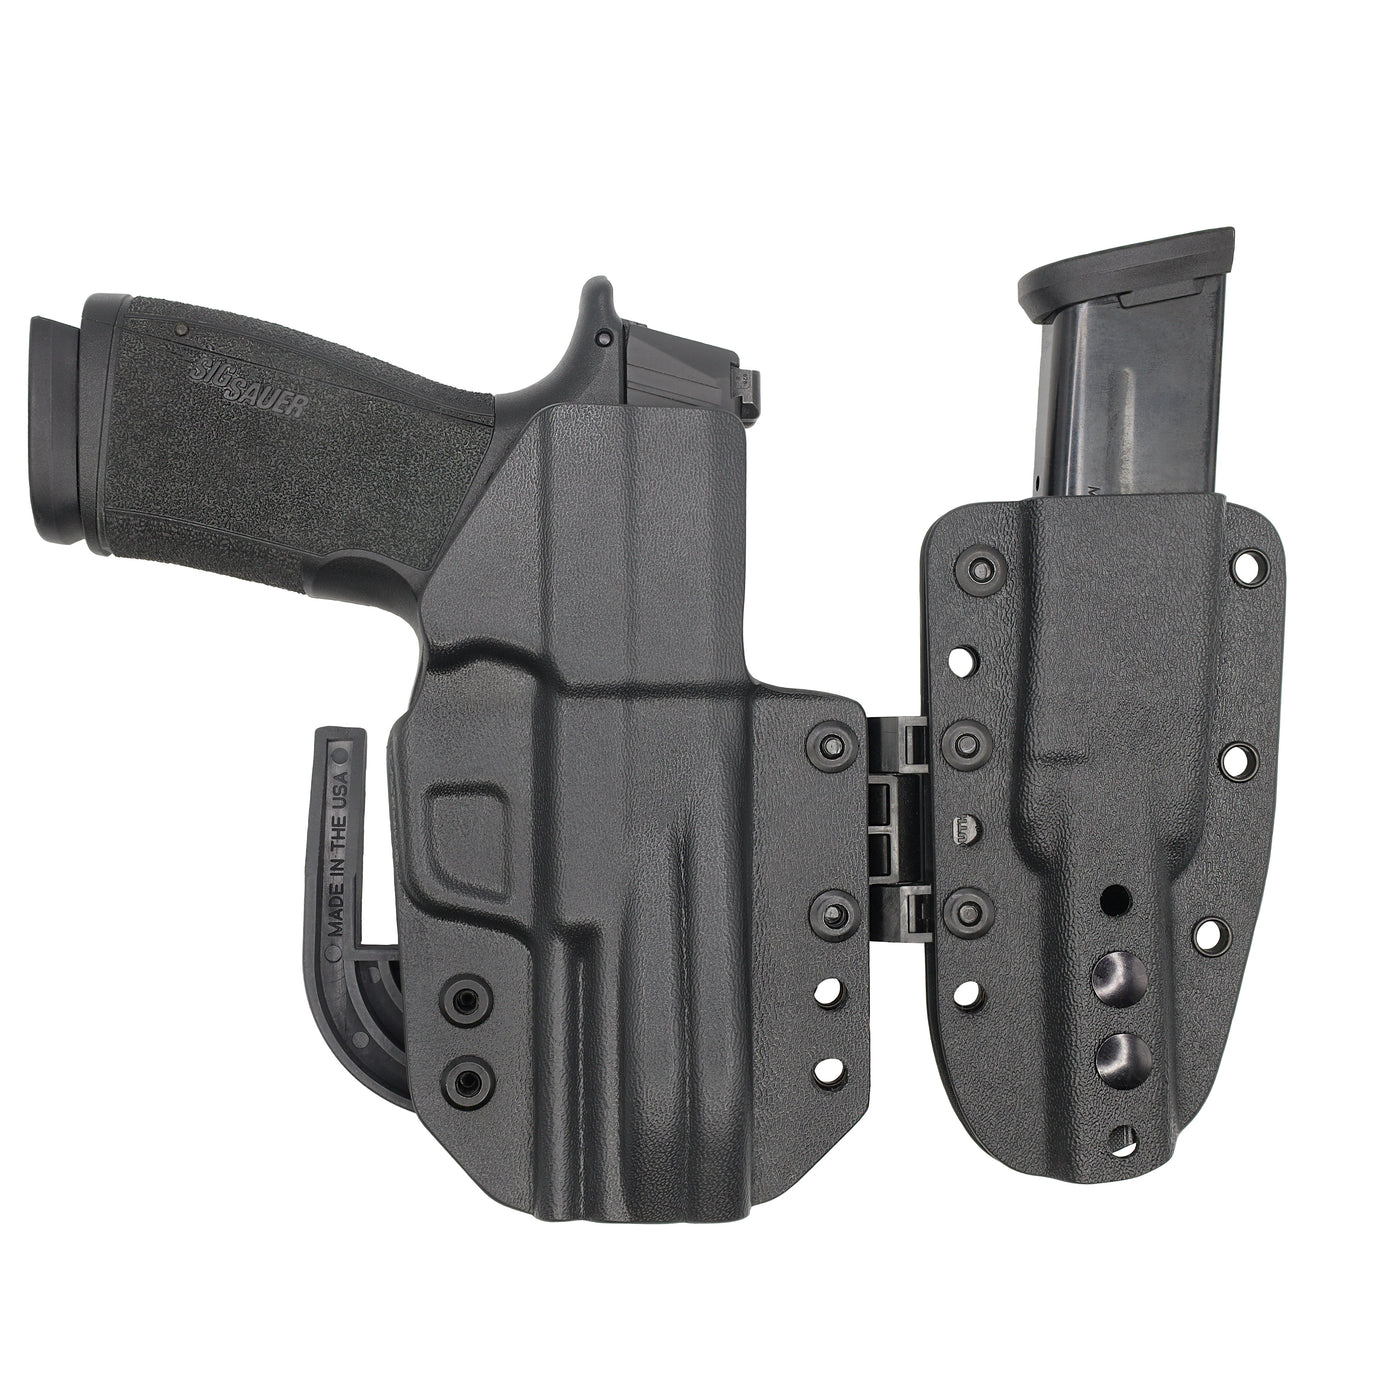 C&G Holsters quickship MOD1 P365-XMACRO holstered LEFT HAND back view